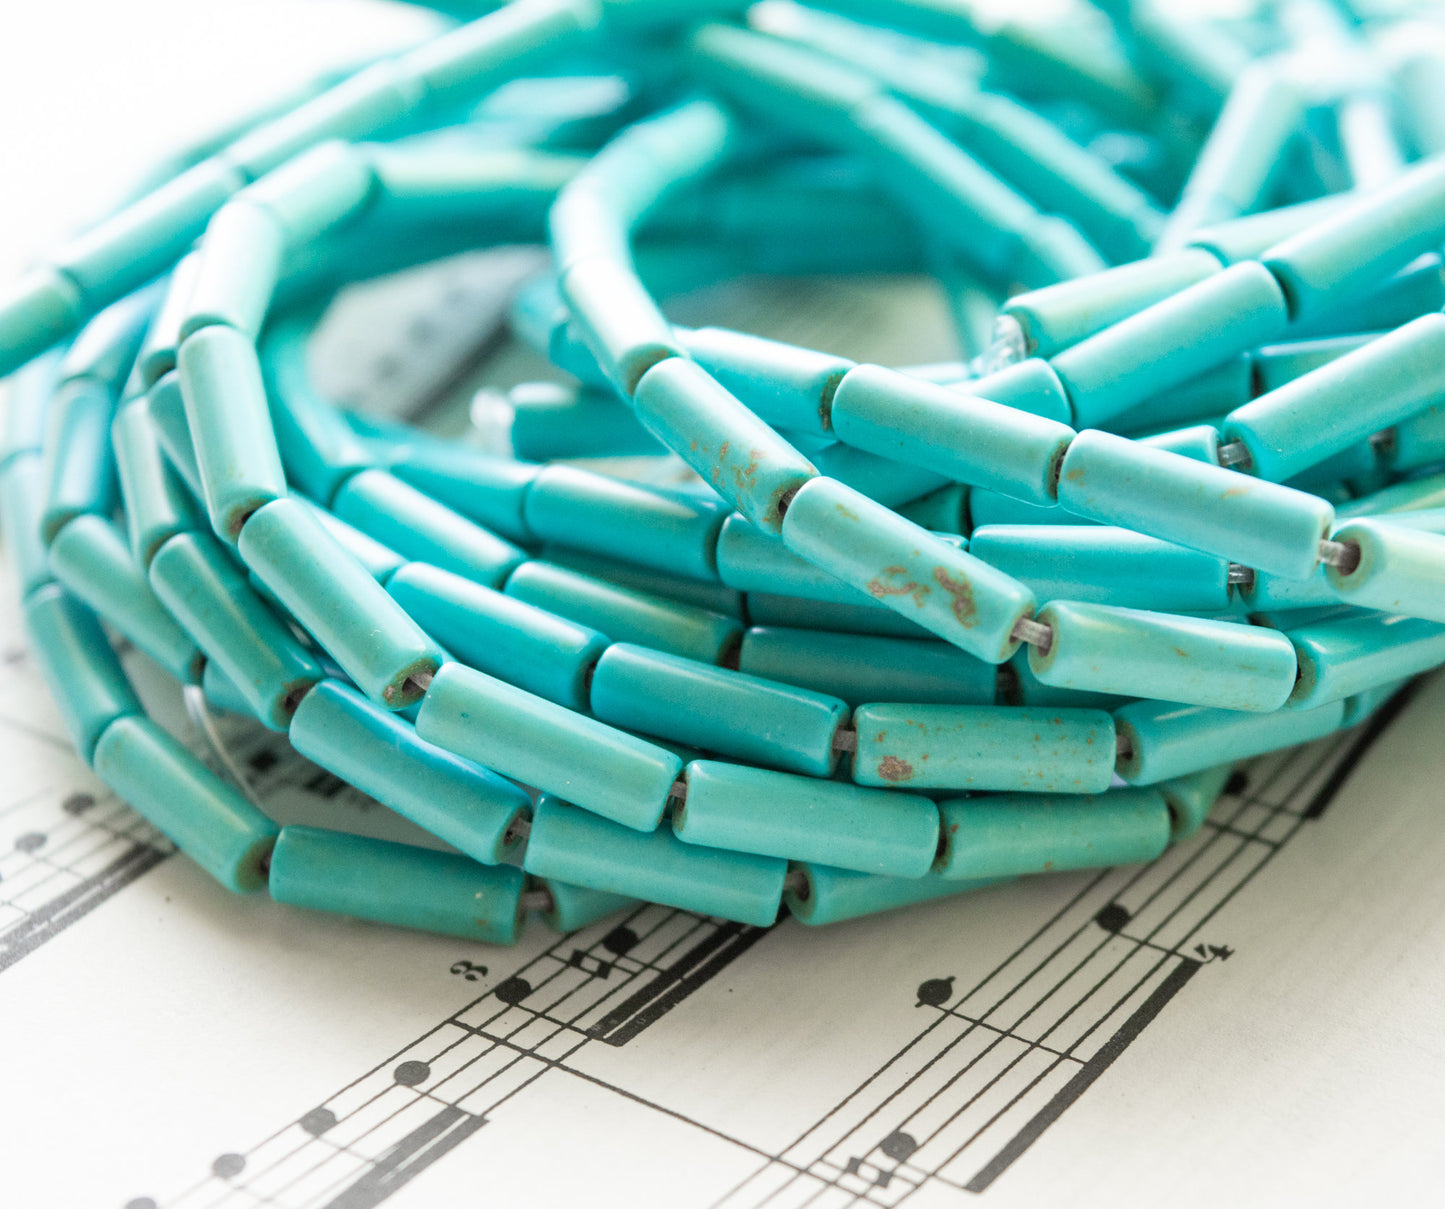 13x4mm Tube Shaped Beads in Turquoise color Dyed Magnesite